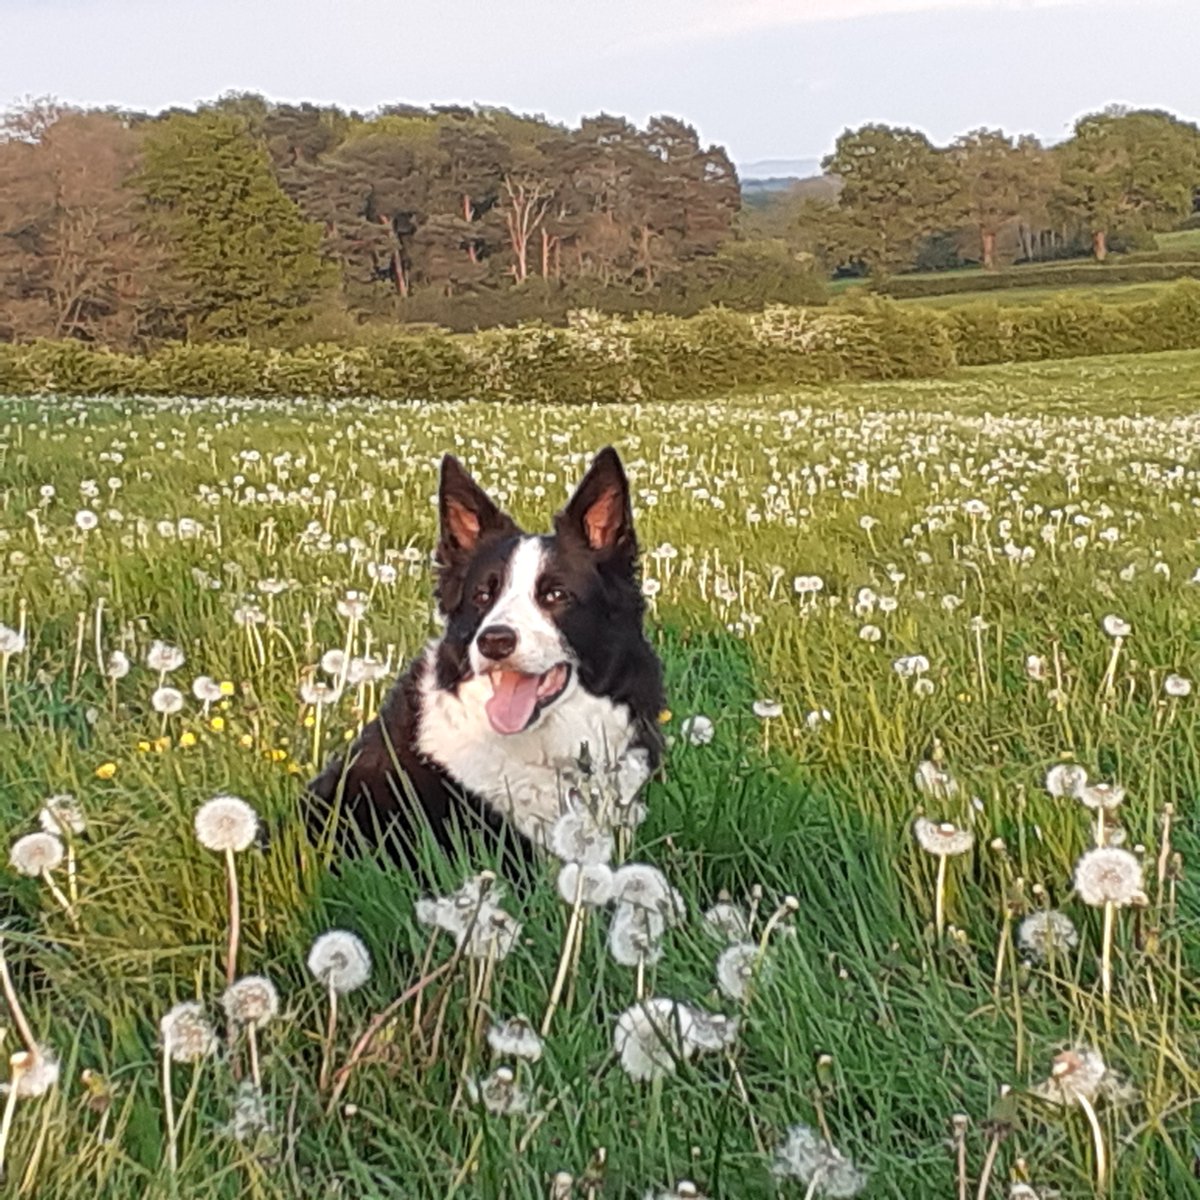 Thank you Dawn 'A little update on Jackson who we rehomed nearly 9 months ago. He settled in perfectly, the easiest collie we have ever had, his previous owners should be proud of the way he was brought up. Thank you for the work you do for these special dogs.'